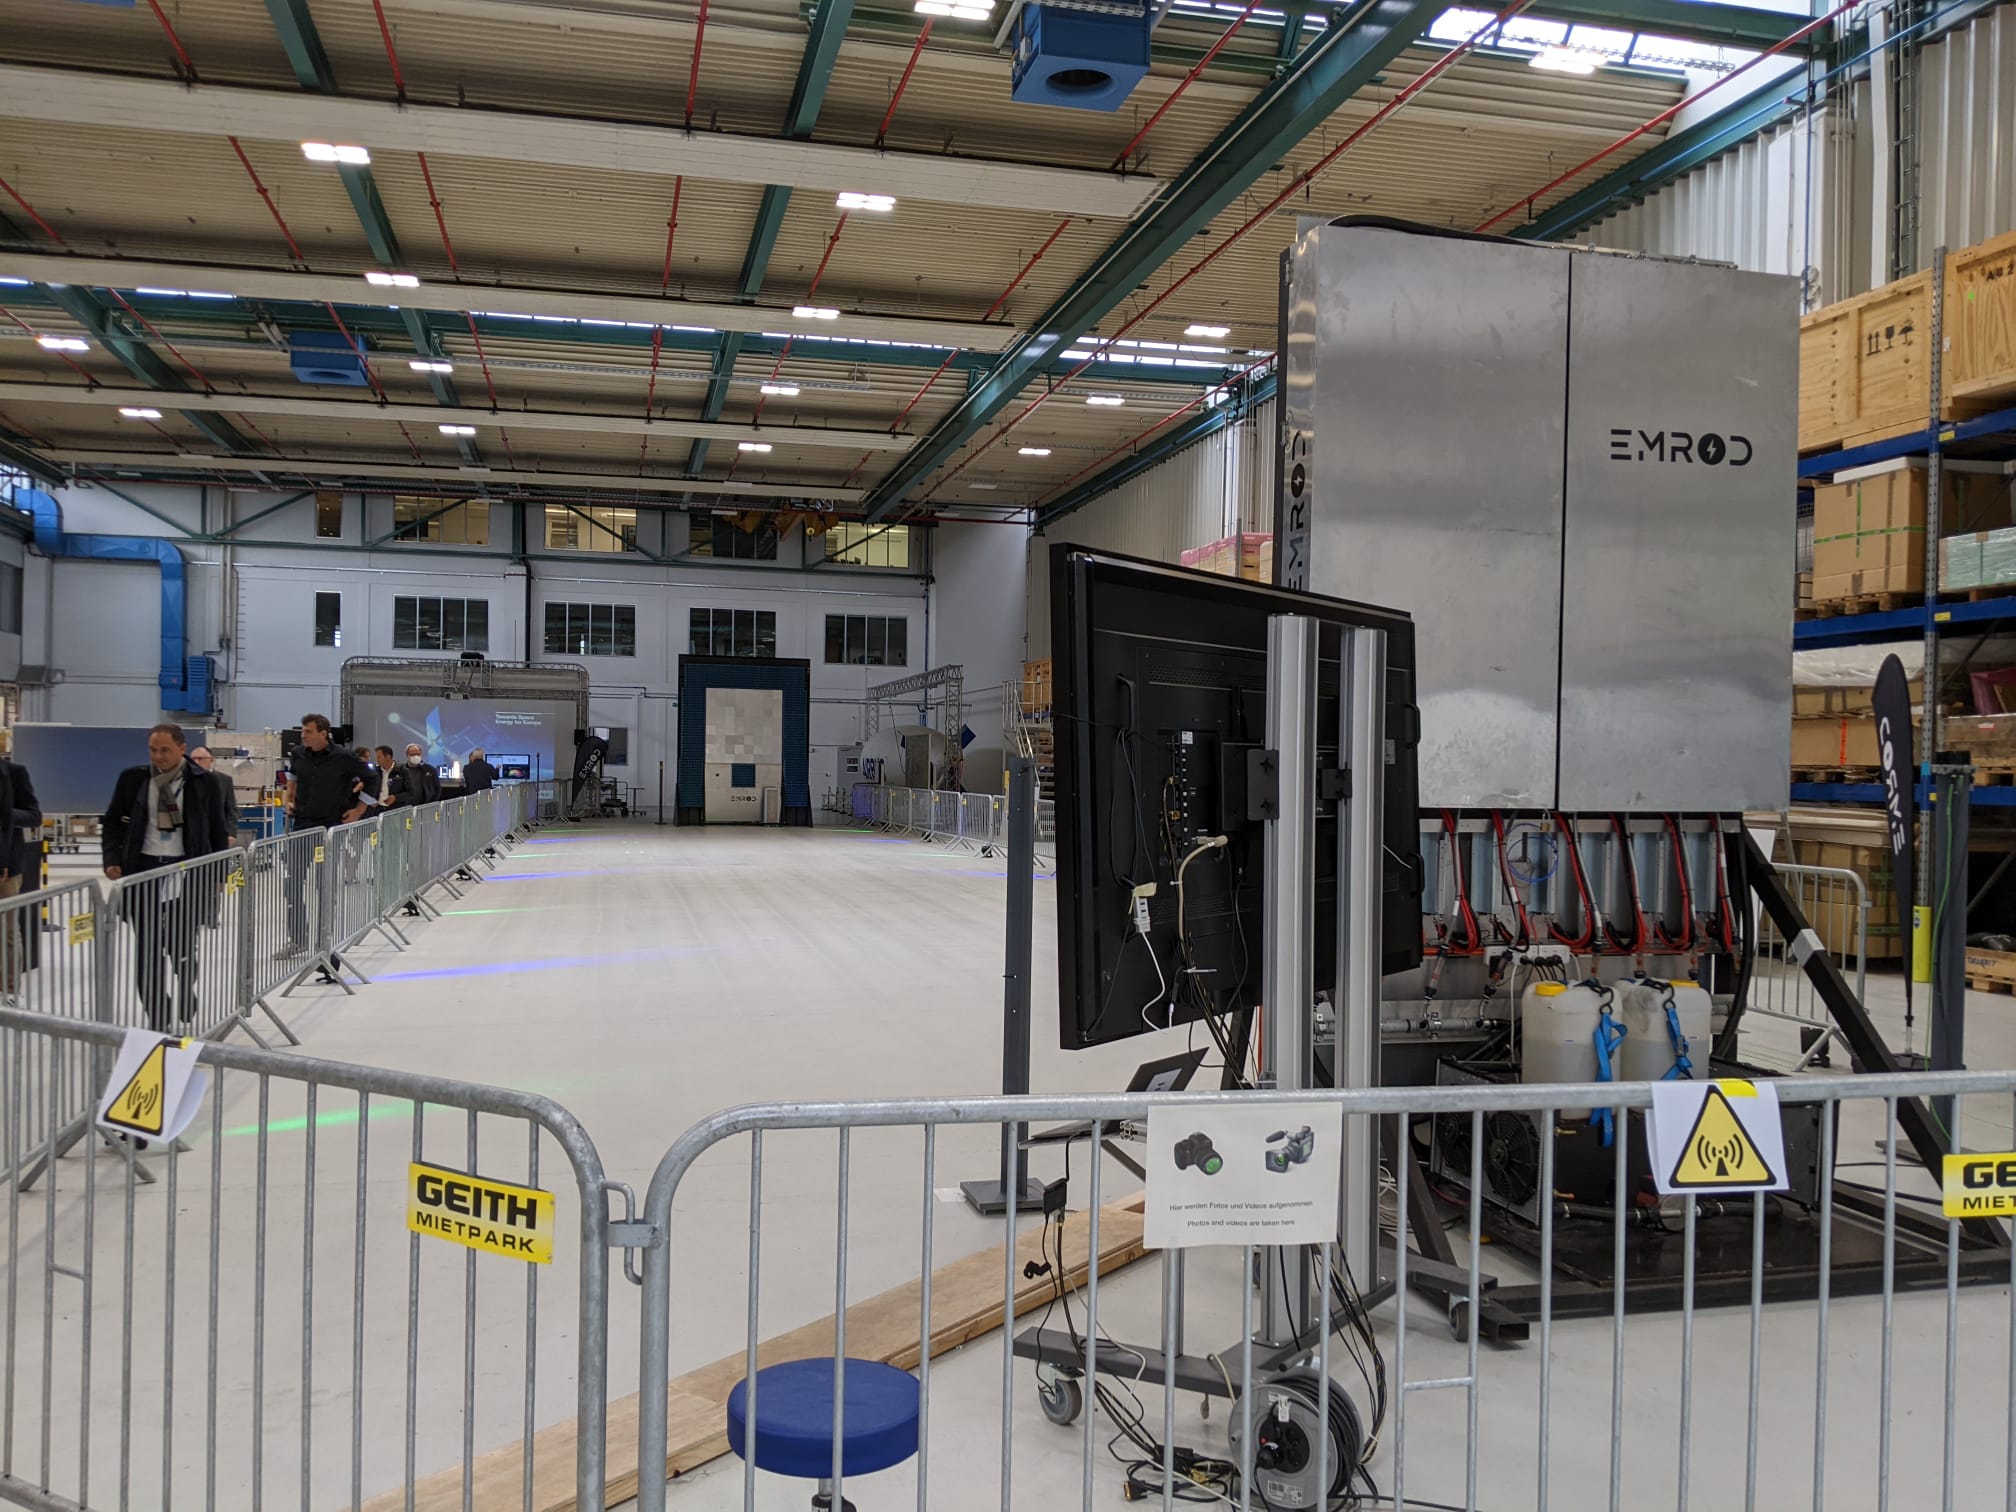 Emrod's demonstration system beams power across an Airbus warehouse.